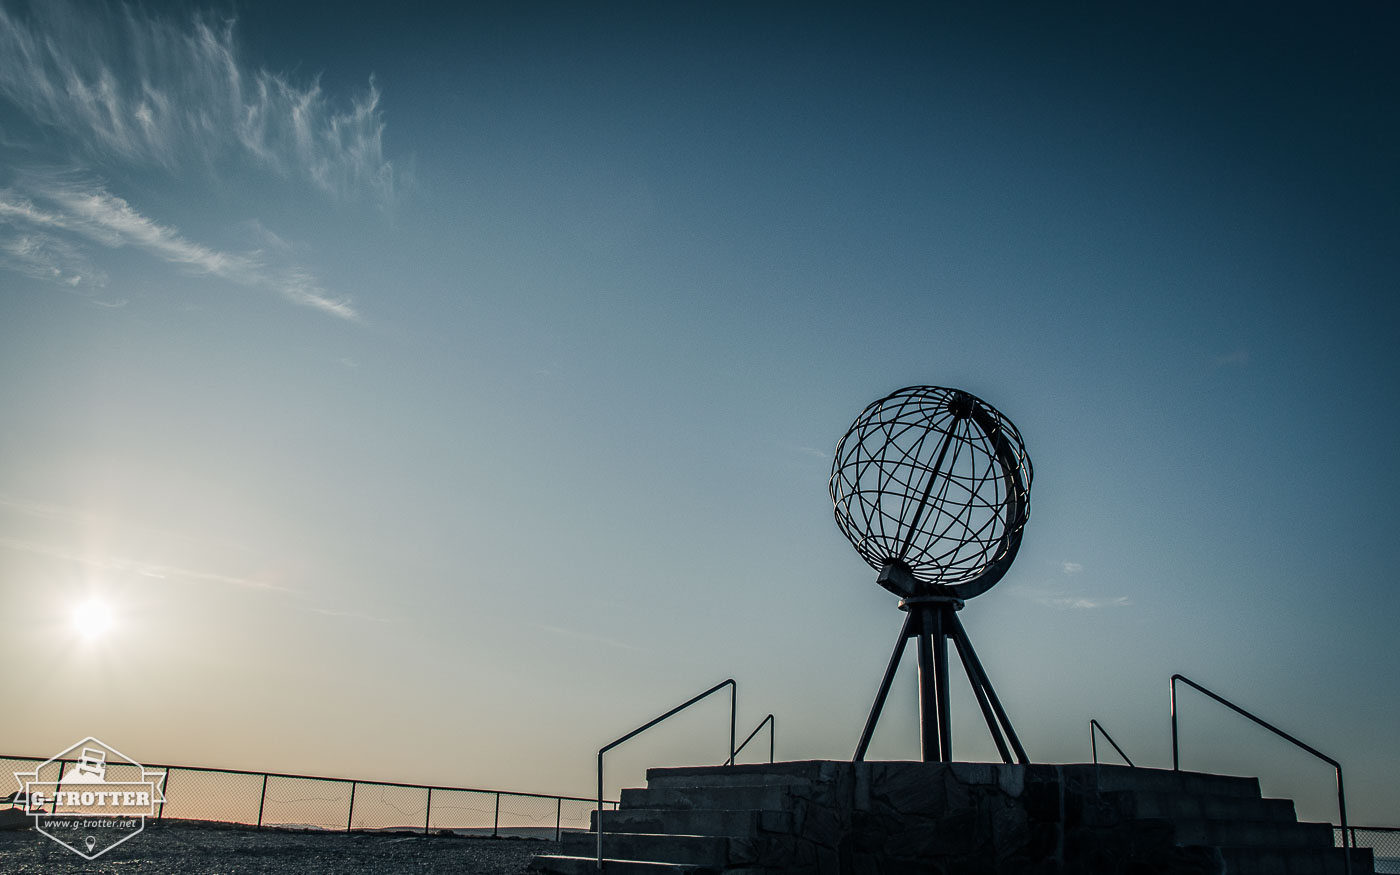  The globe as the symbol of the North Cape.